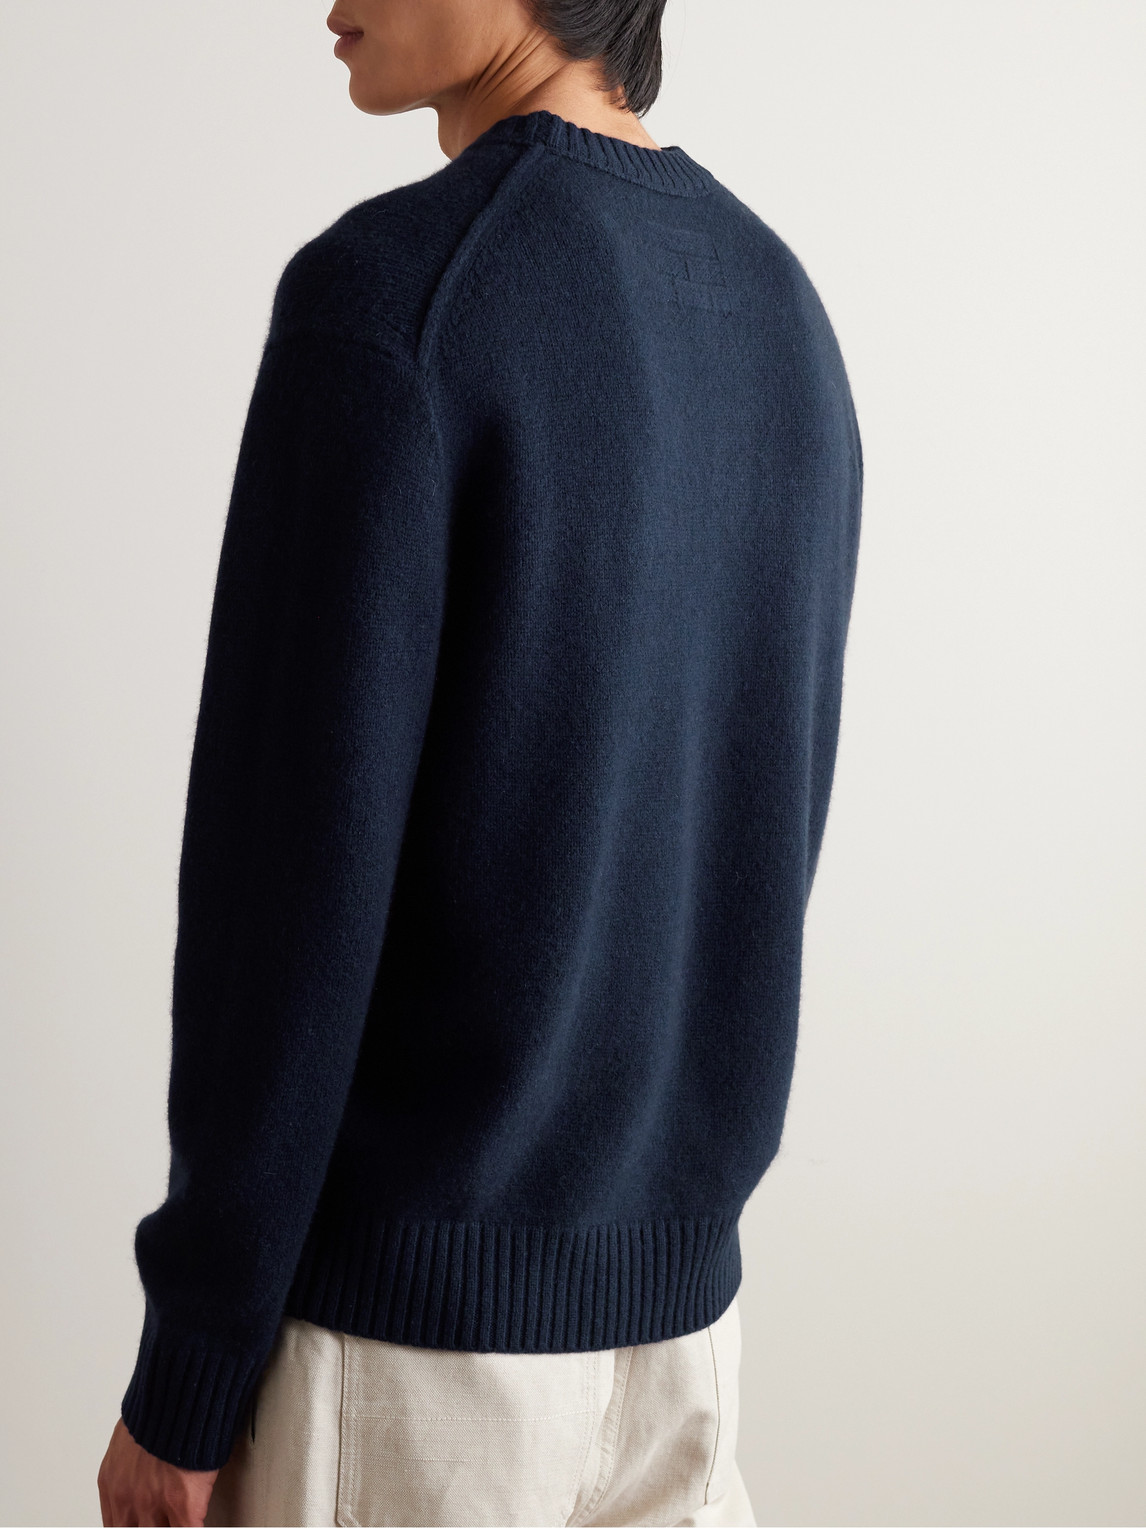 Shop Frame Cashmere Sweater In Blue